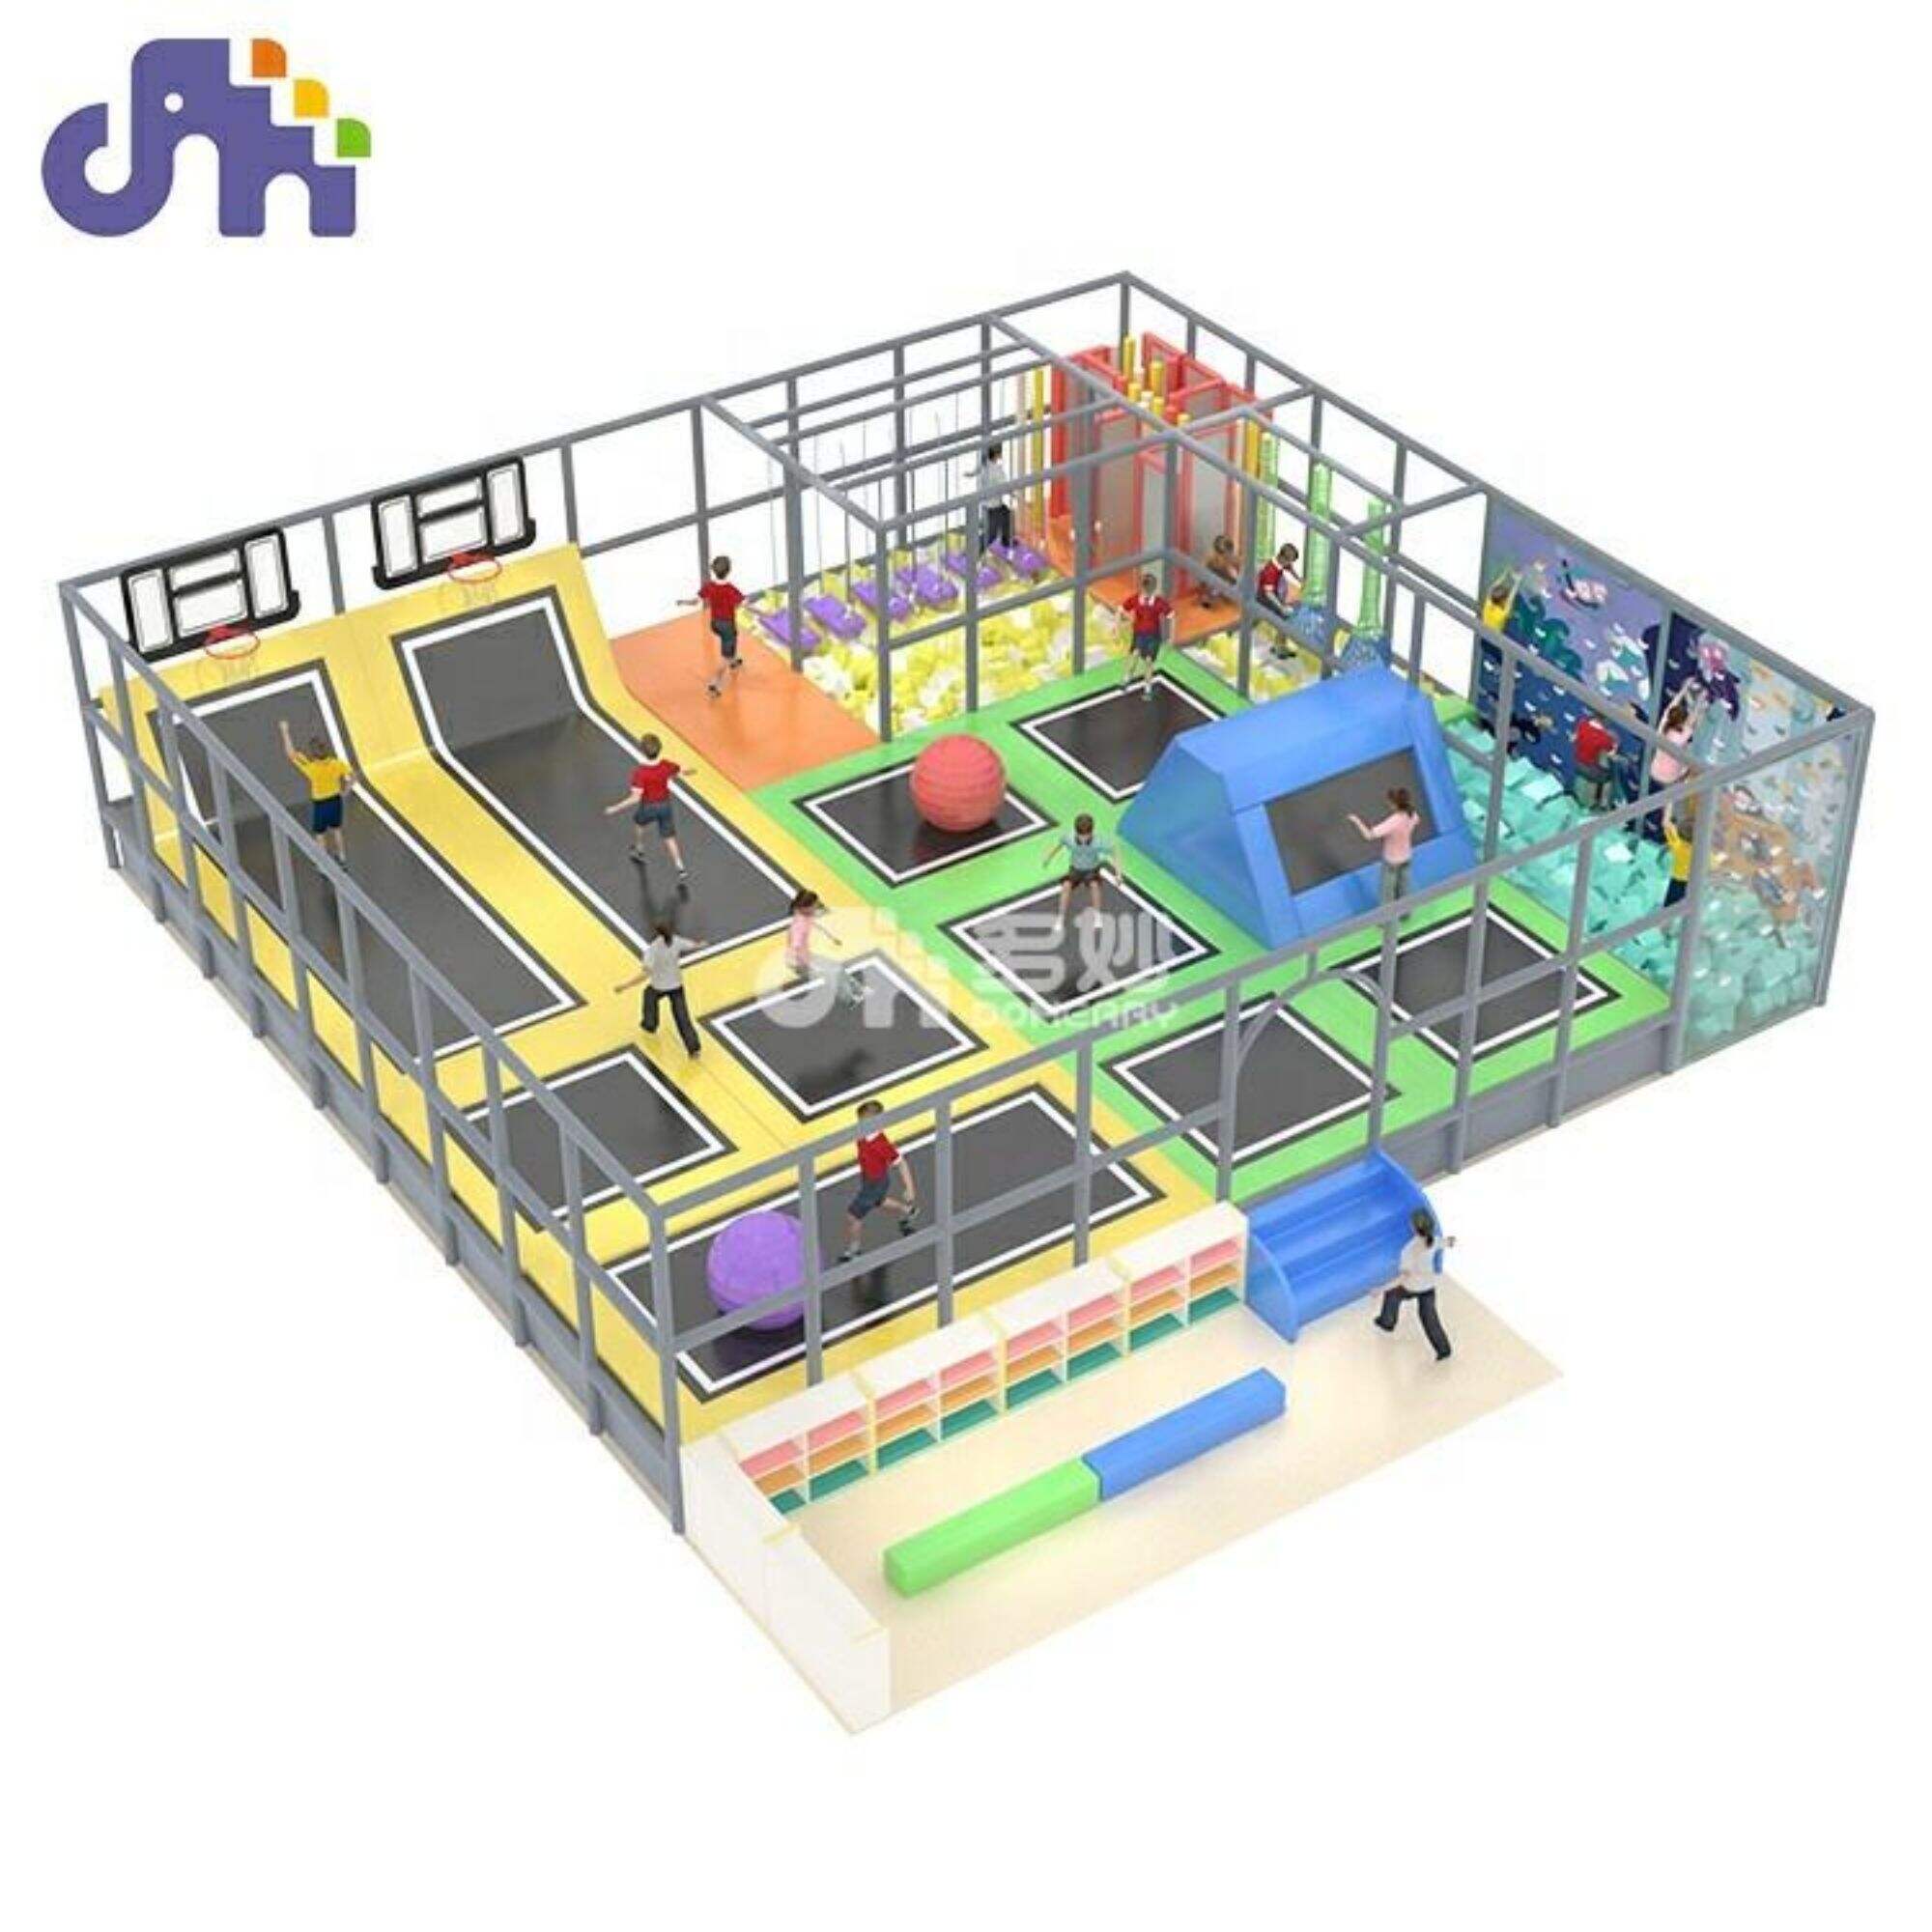 Domerry amusement equipment fitness jumping trampolines trampoline park indoor for kids